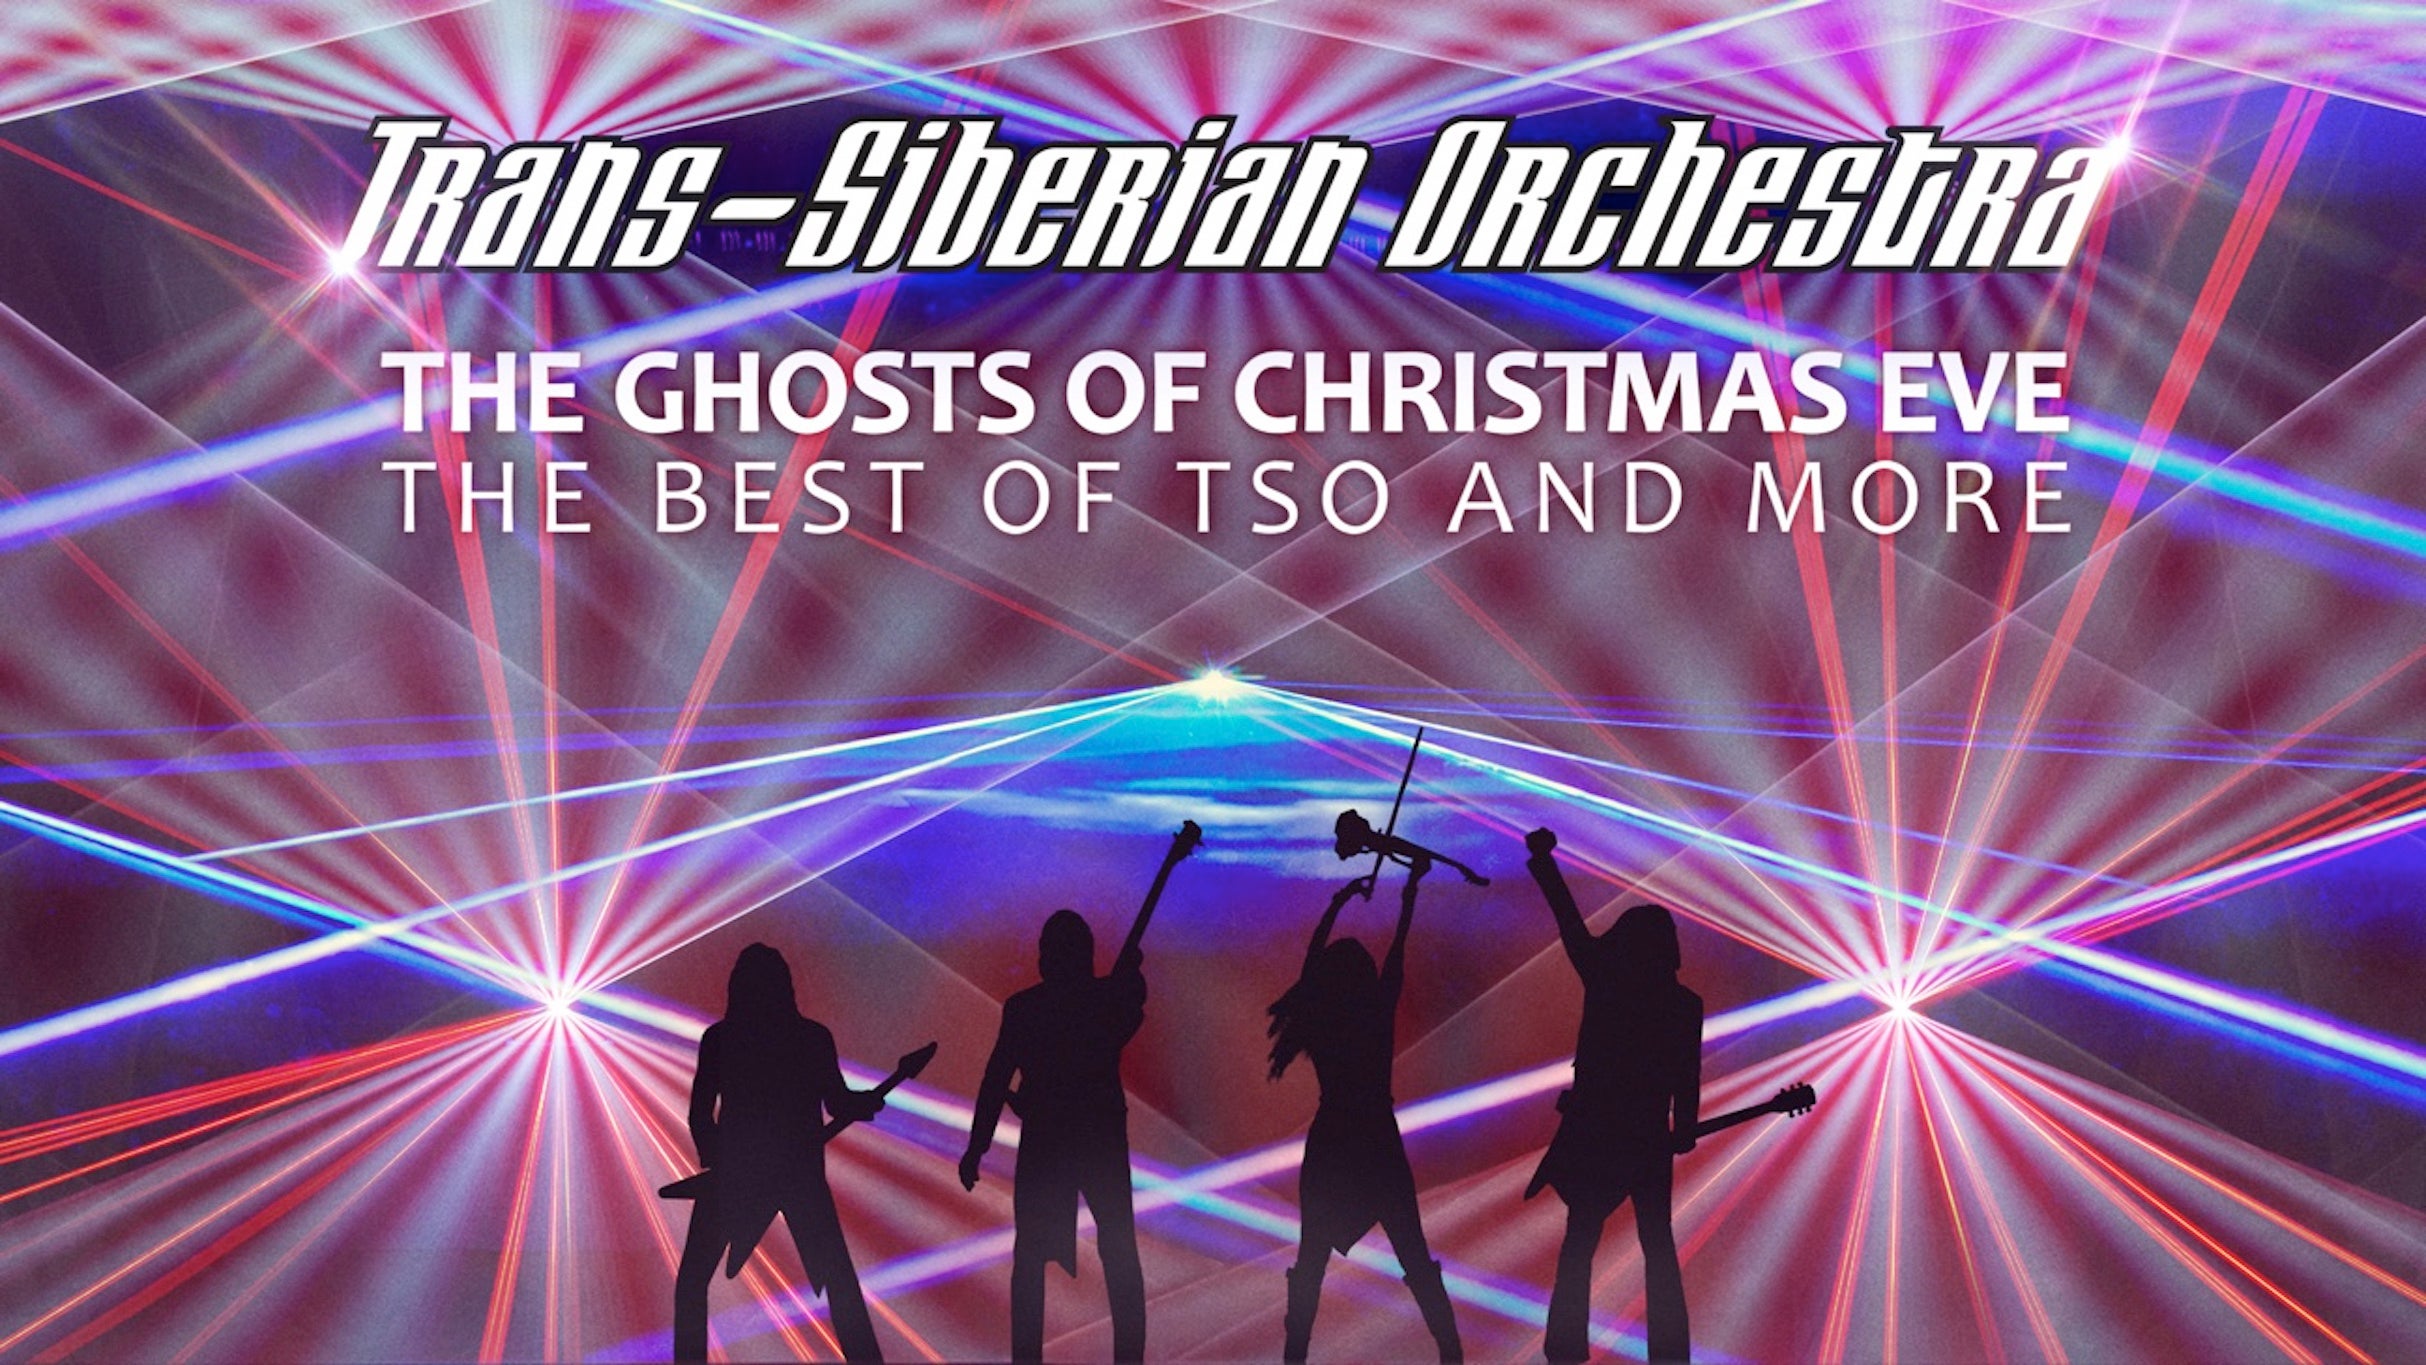 Trans-Siberian Orchestra - The Ghosts Of Christmas Eve presale code for concert tickets in Oklahoma City, OK (Paycom Center)